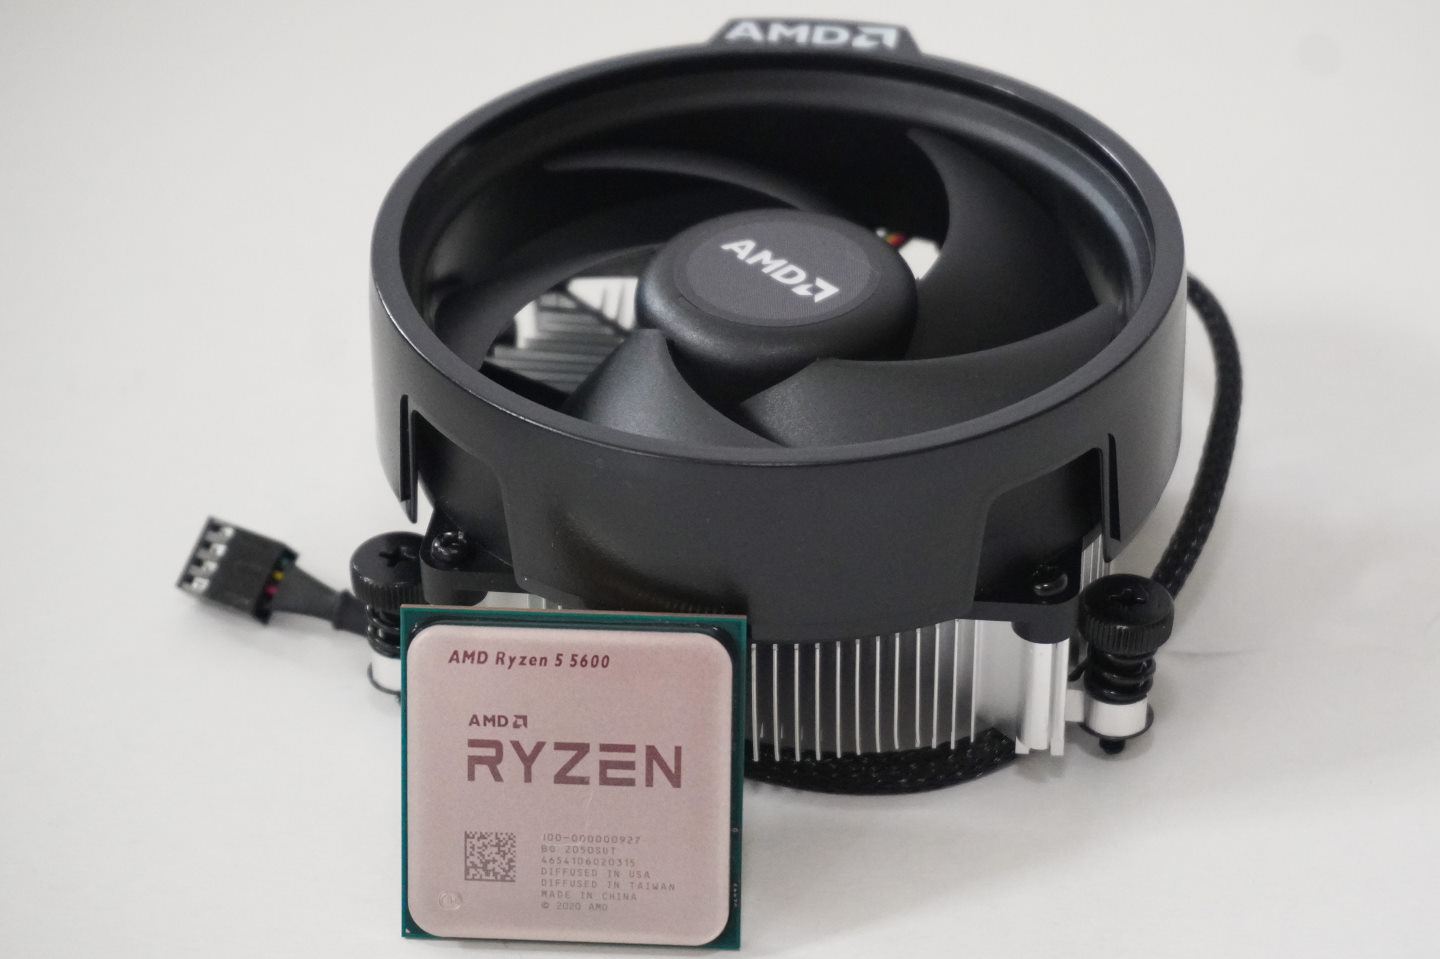 The Ryzen 5 5600 boxed version comes with an original fan, and users without special overclocking needs do not need to purchase an additional radiator.